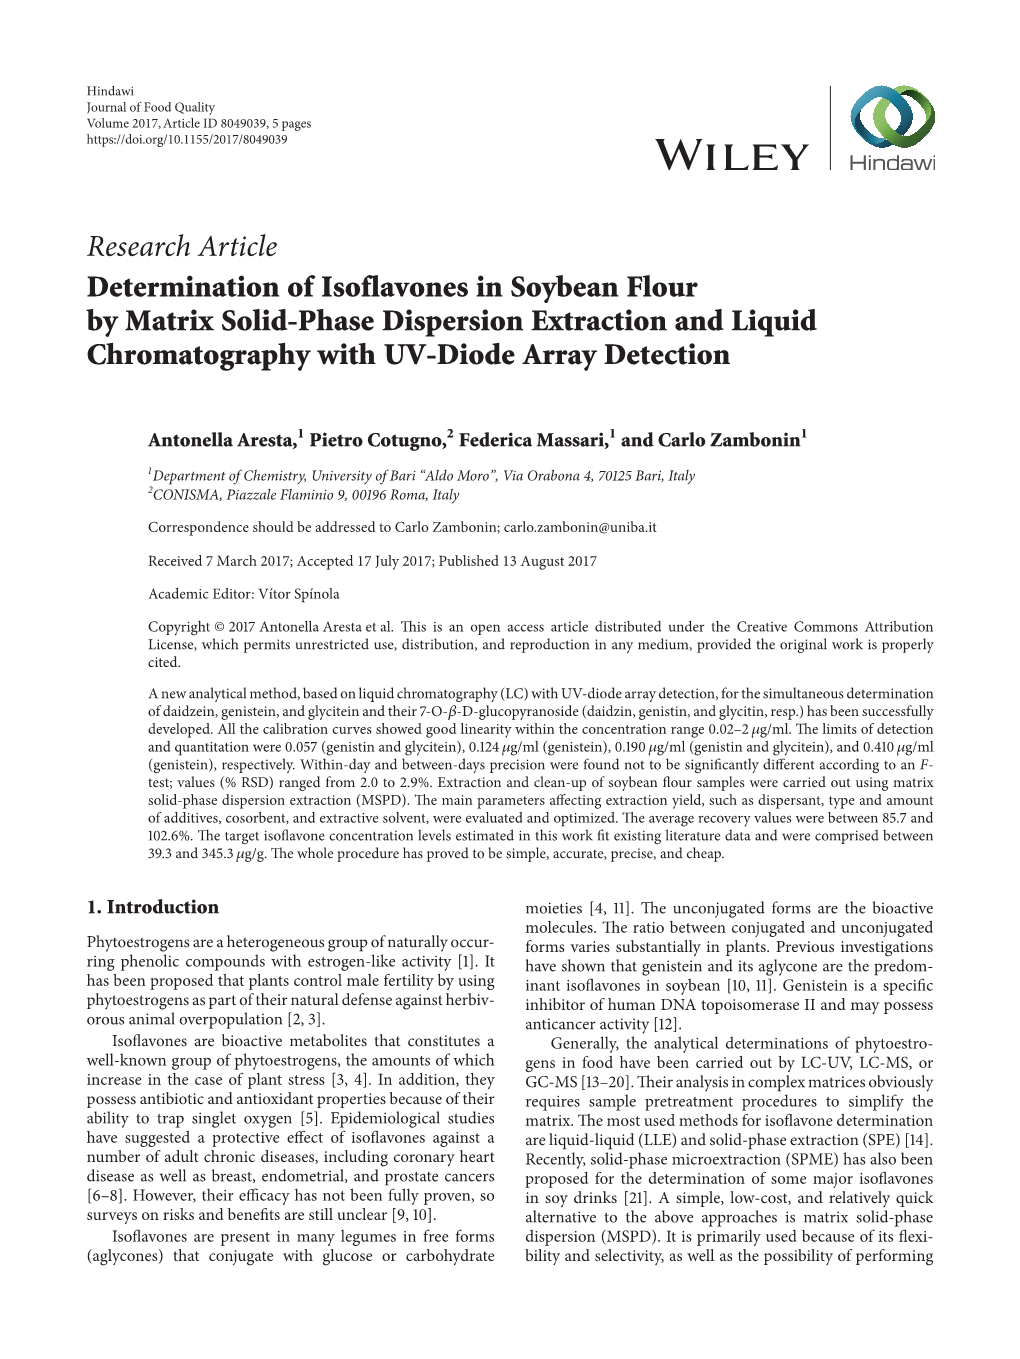 Determination of Isoflavones in Soybean Flour by Matrix Solid-Phase Dispersion Extraction and Liquid Chromatography with UV-Diode Array Detection